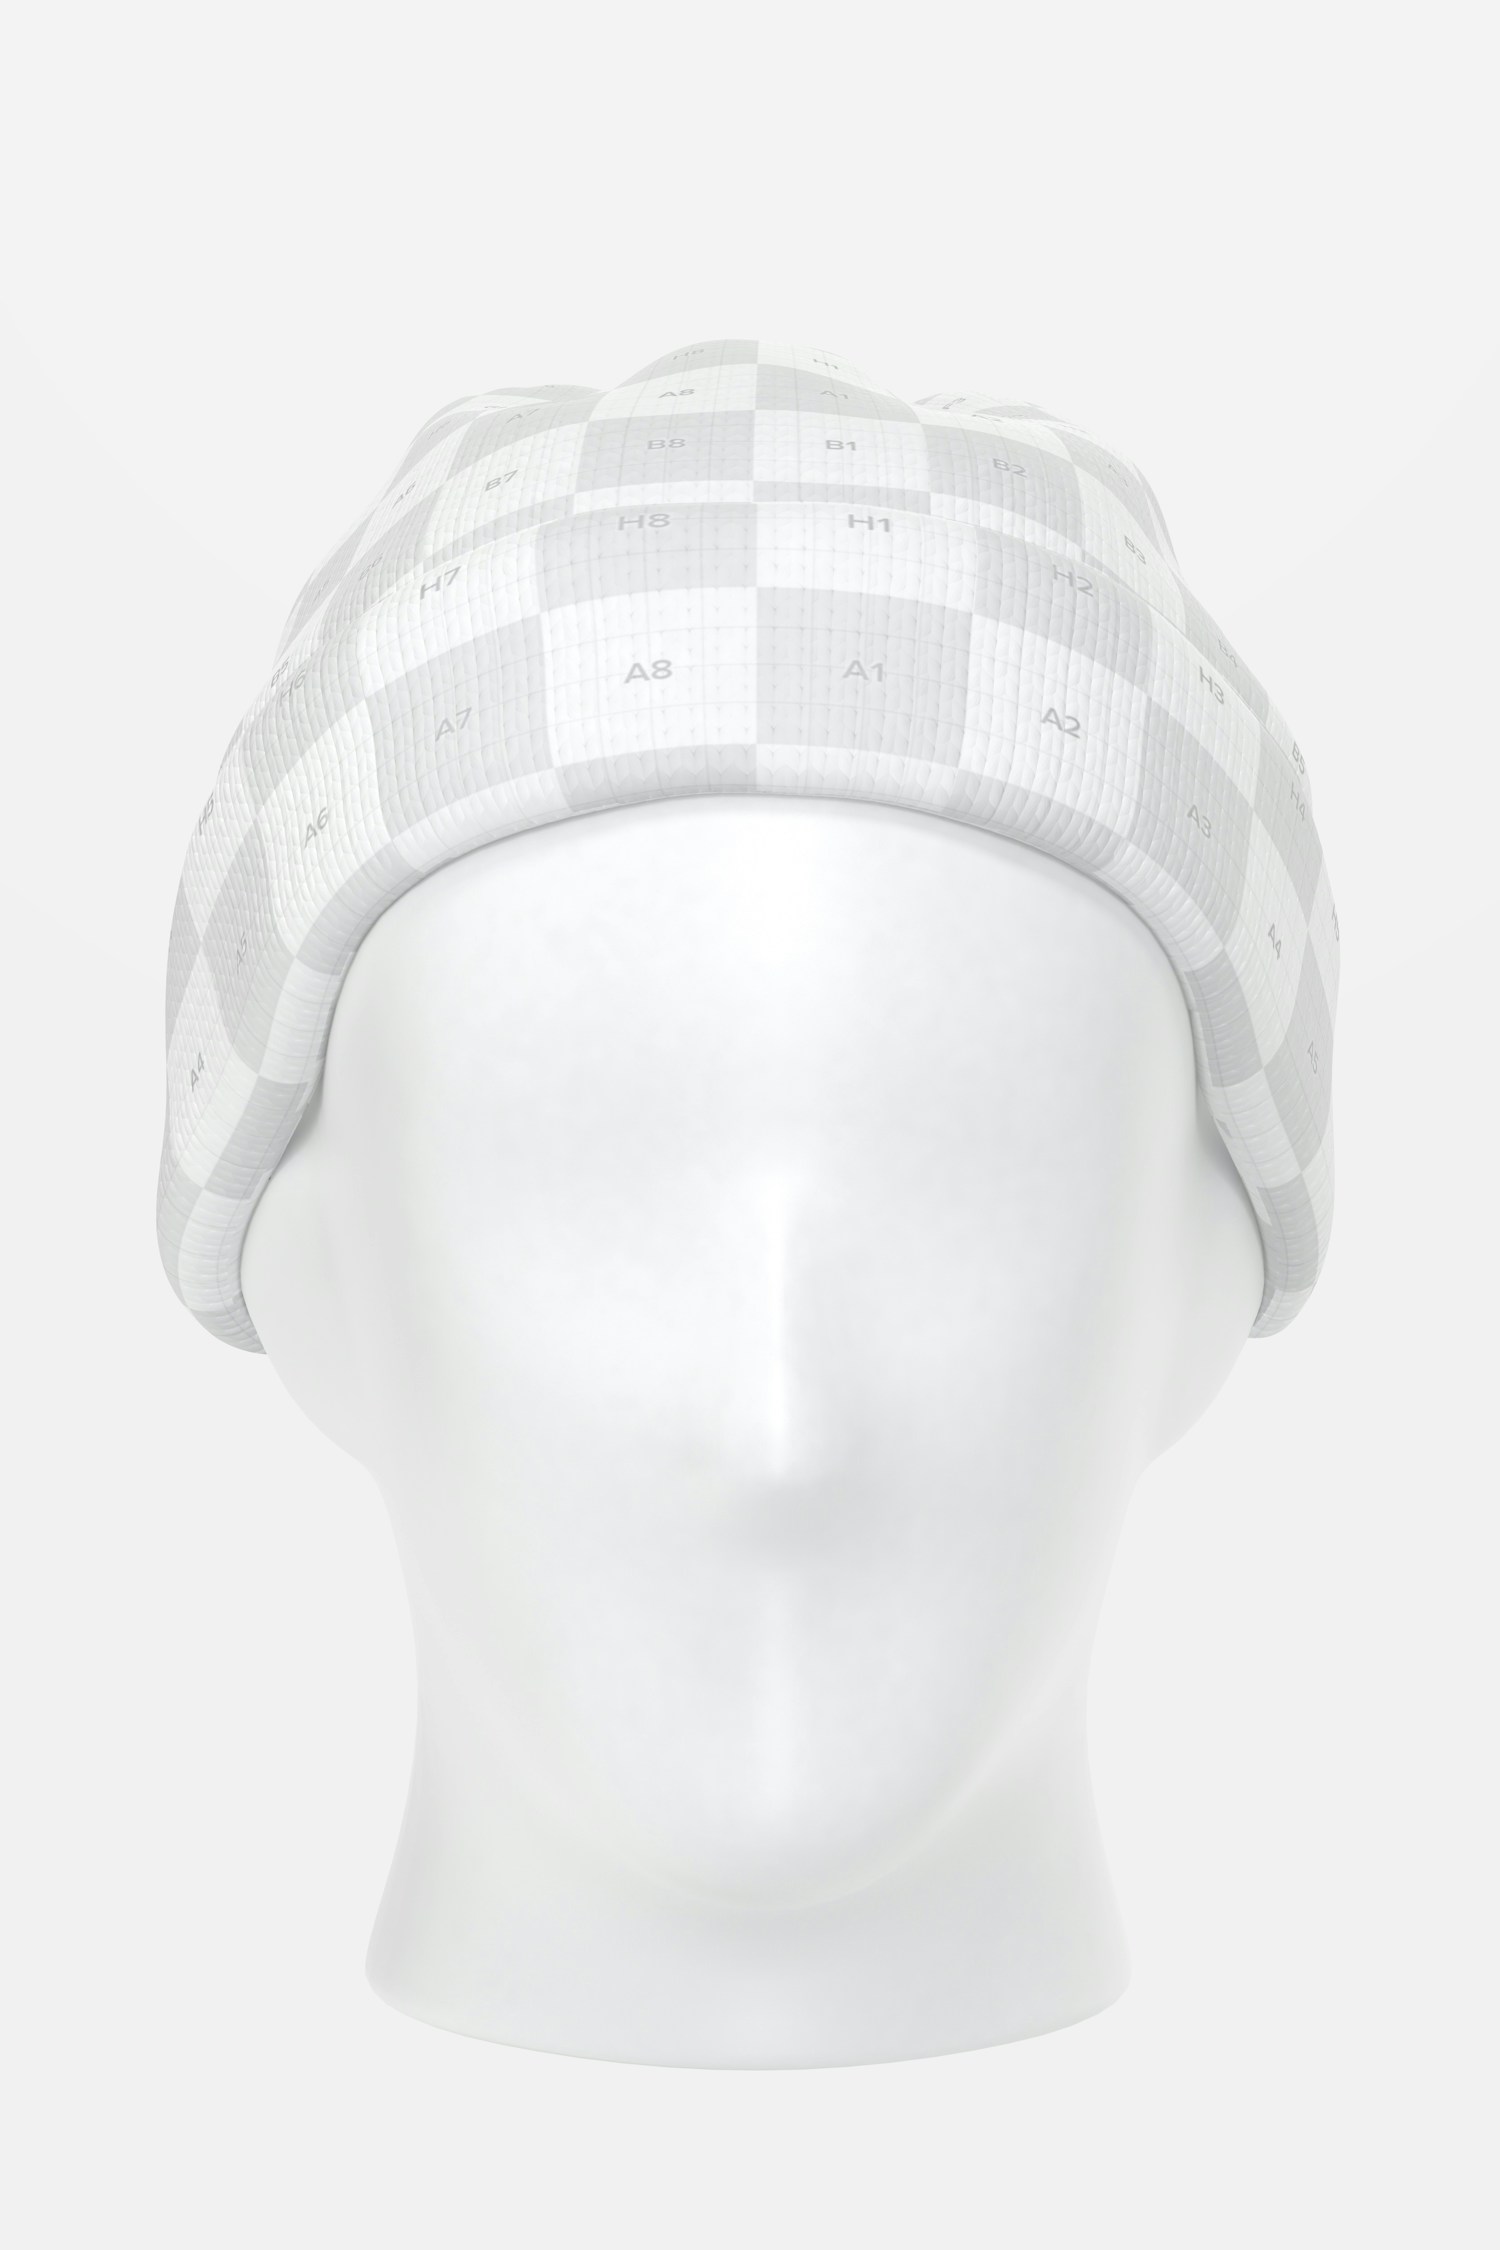 Beanie with Head Mockup, Front View